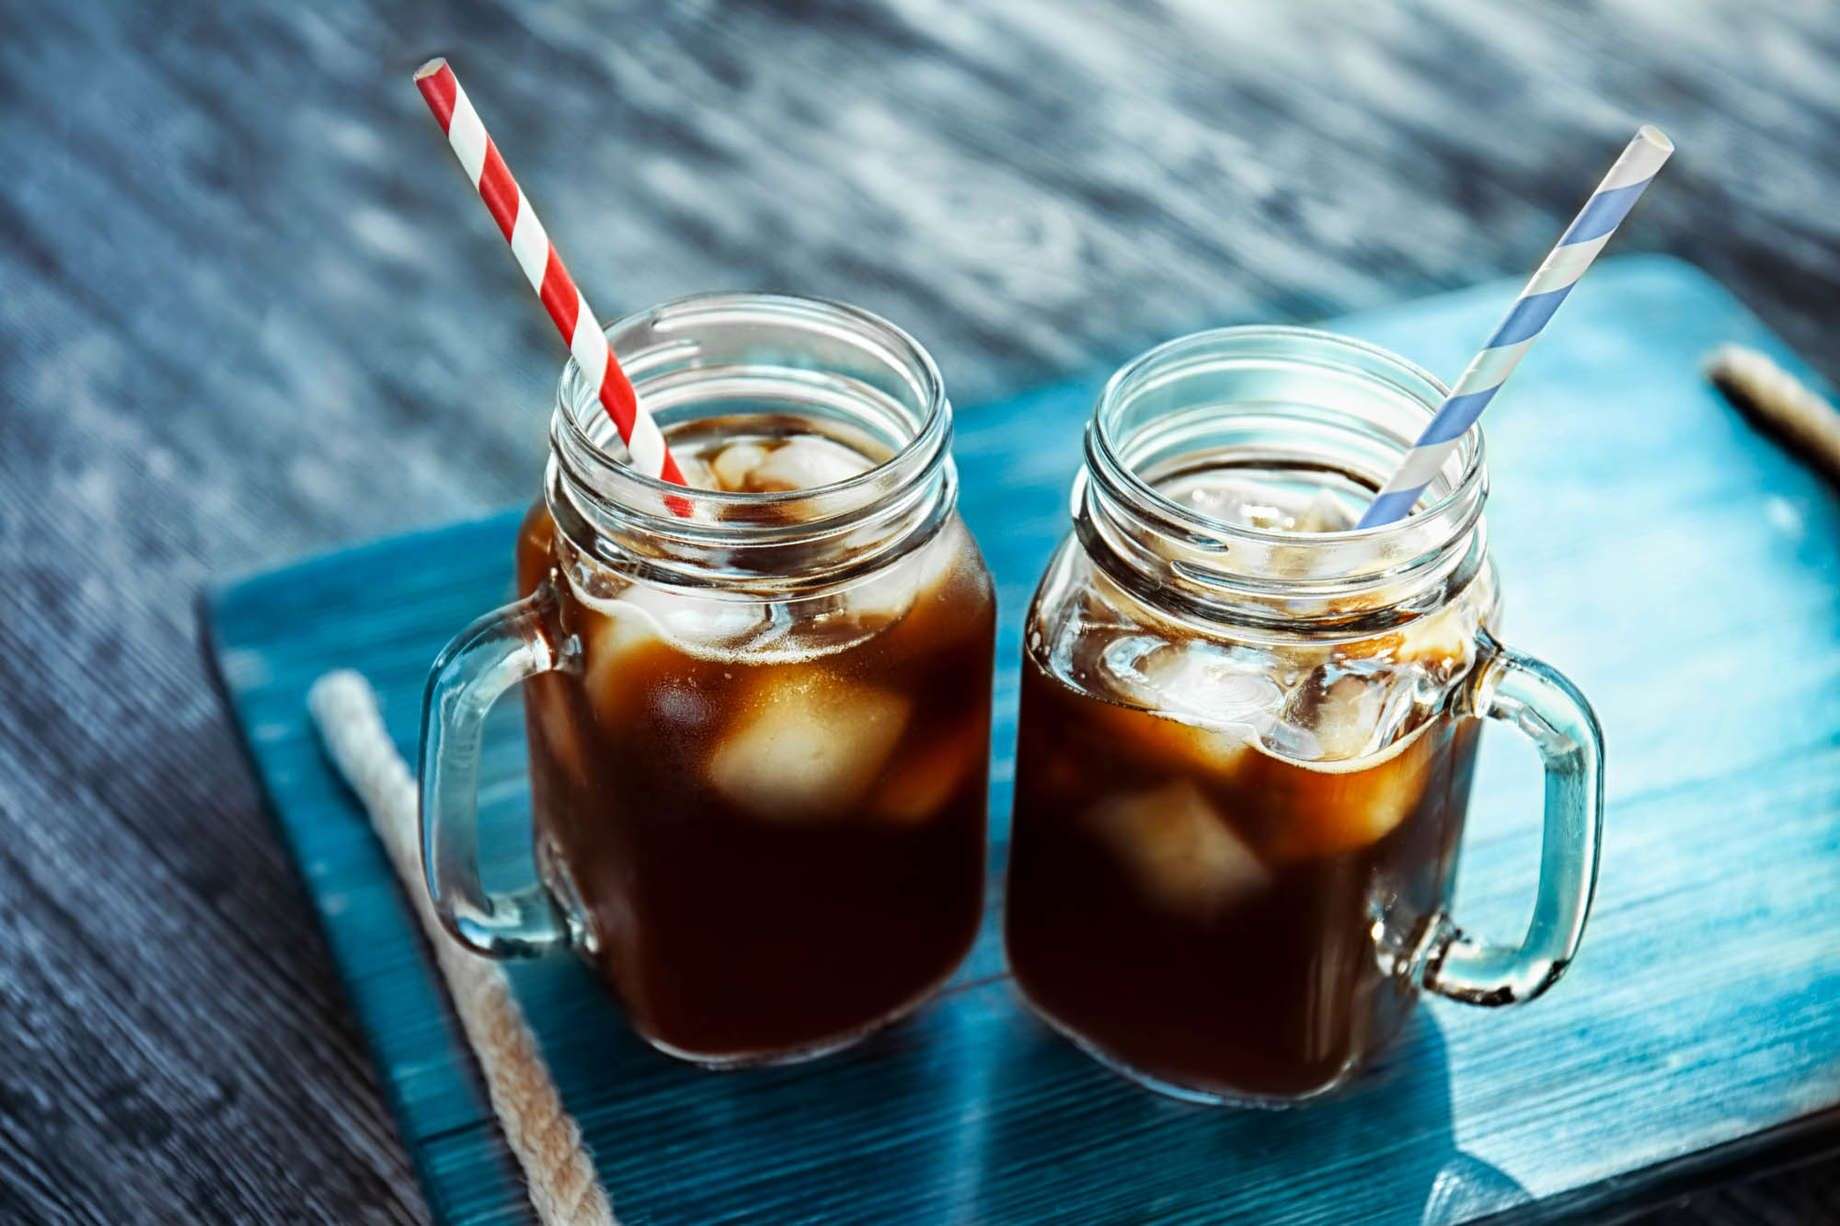 How to Make Cold Brewed Coffee at Home